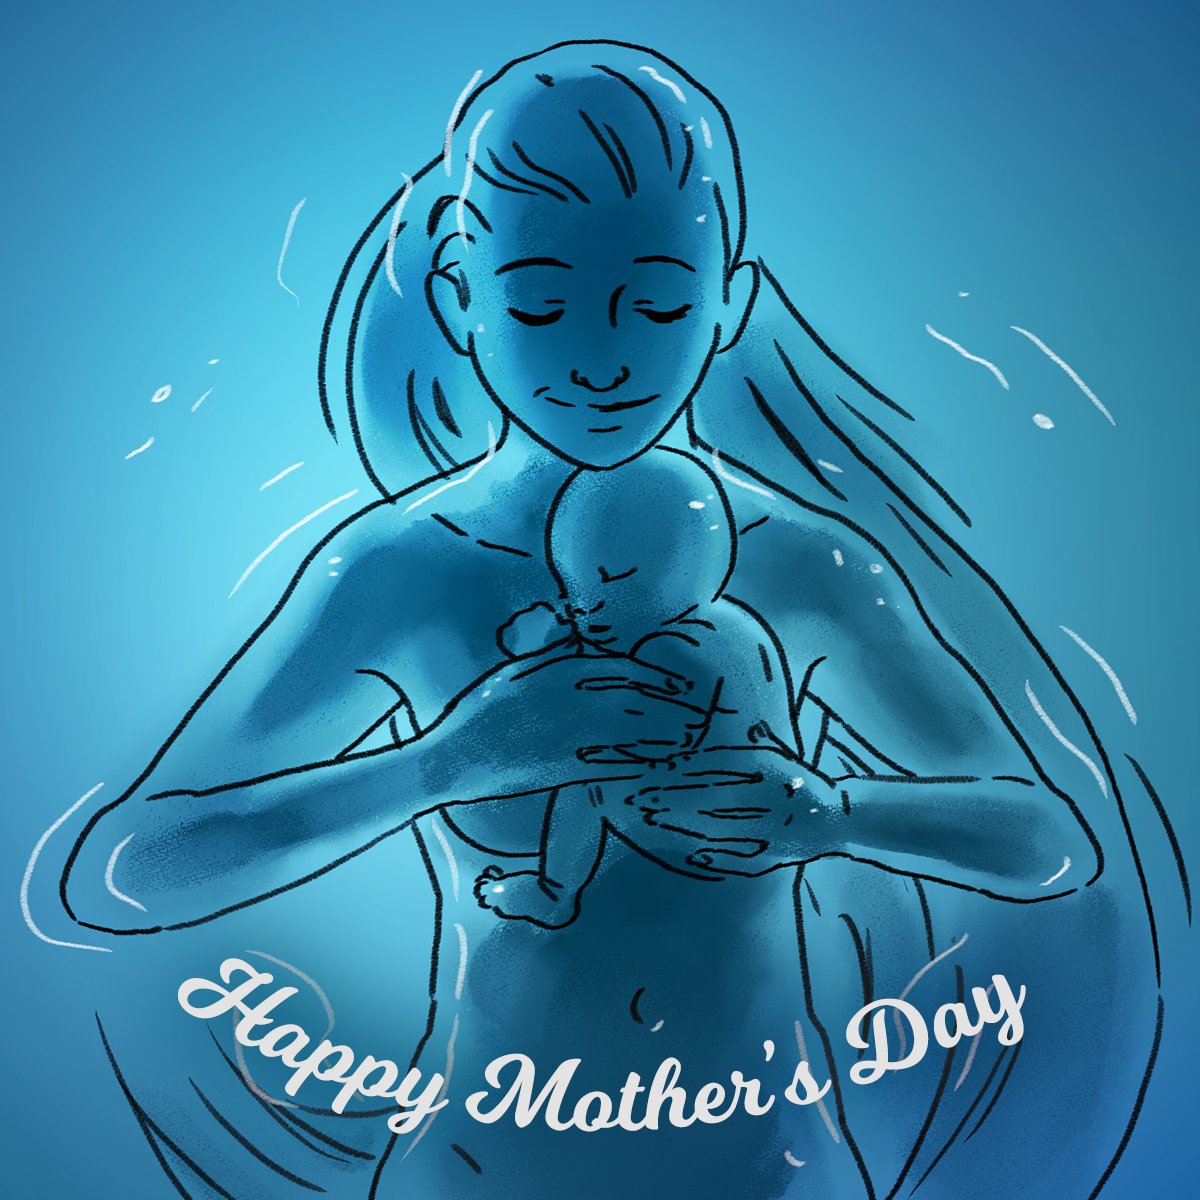 Mothers hold us up every day; this Mother’s Day, give back with the gift of buoyant relaxation. #floating #selfcare #mindfulness #rest #recovery #relax #meditation #veteranowned #mothersday #infraredsauna #selfcaretips #selfcaredaily  #love #happiness #mentalhealth #healthyliving